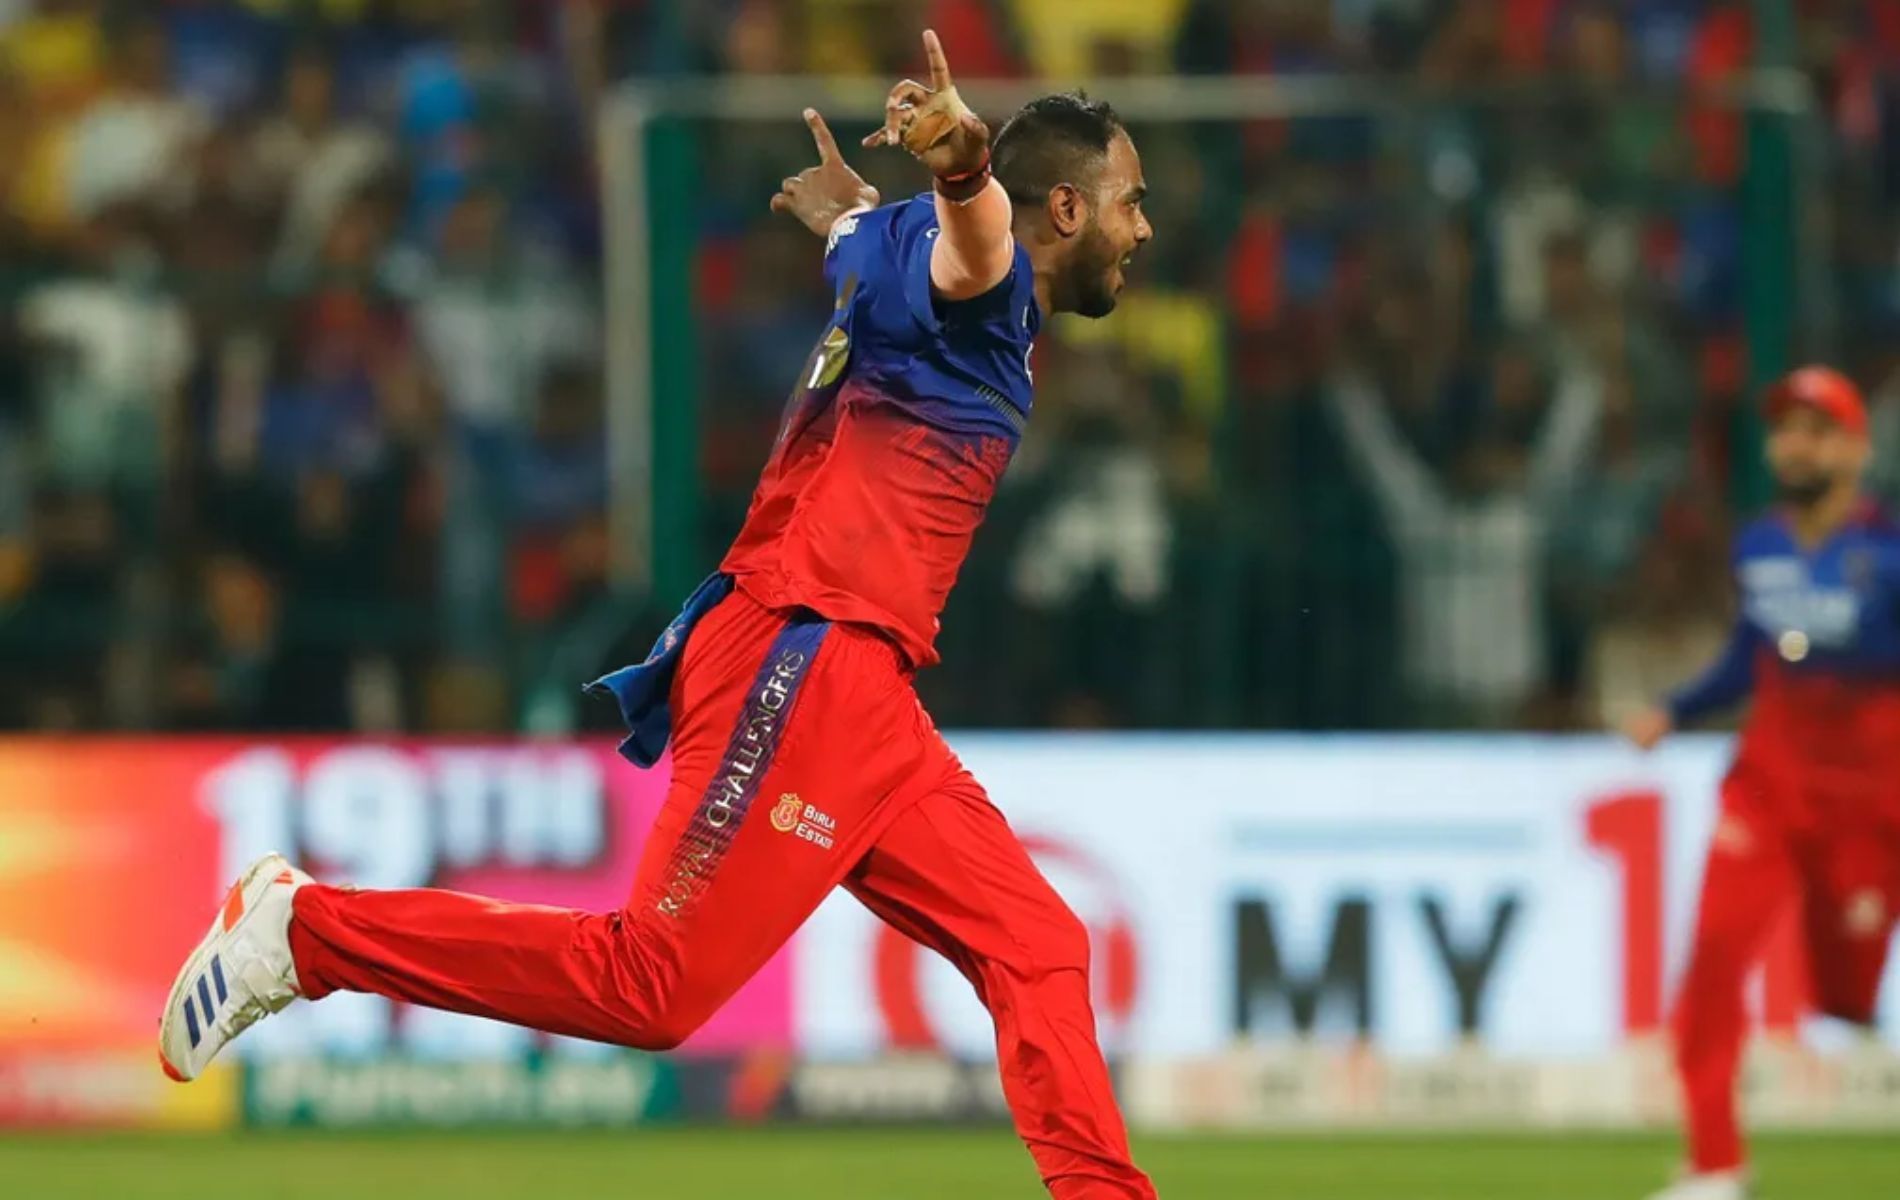 Yash Dayal earned widespread praise for his last-over heroics in RCB vs CSK clash.